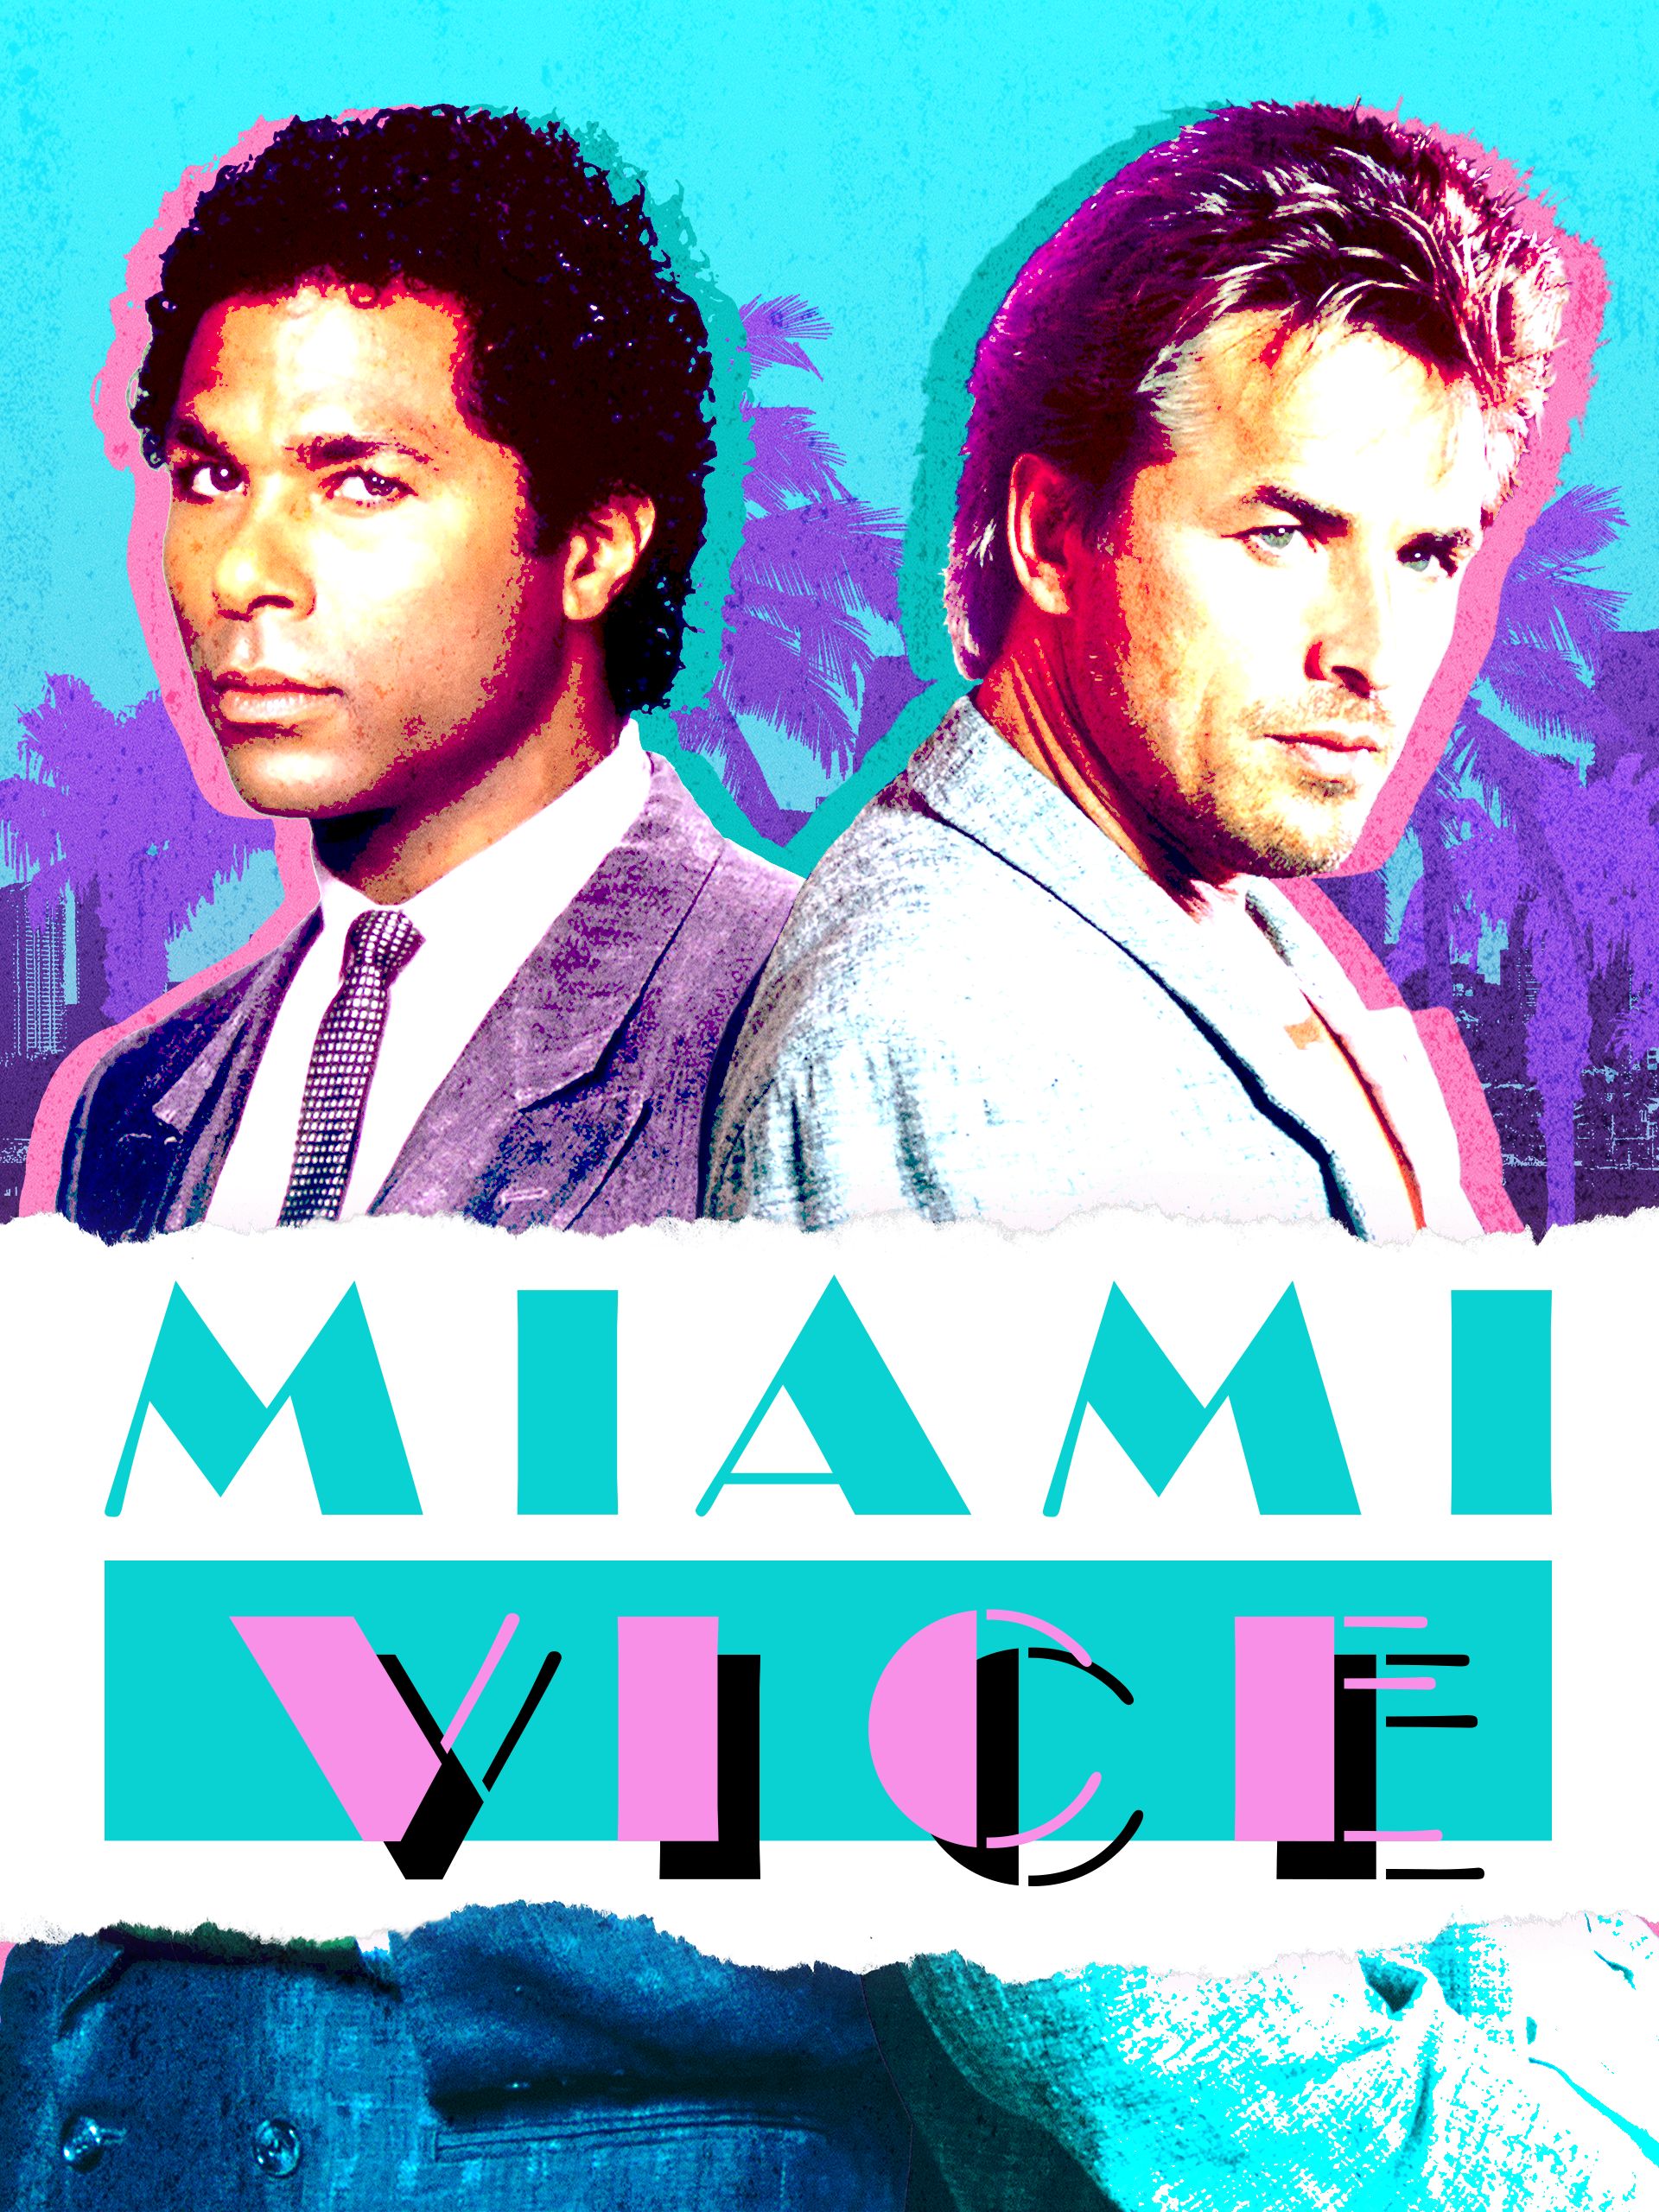 Miami Vice Netflix: The Ultimate 80s Crime Drama - Binge-Worthy Action, Glamour, and Intrigue! 12